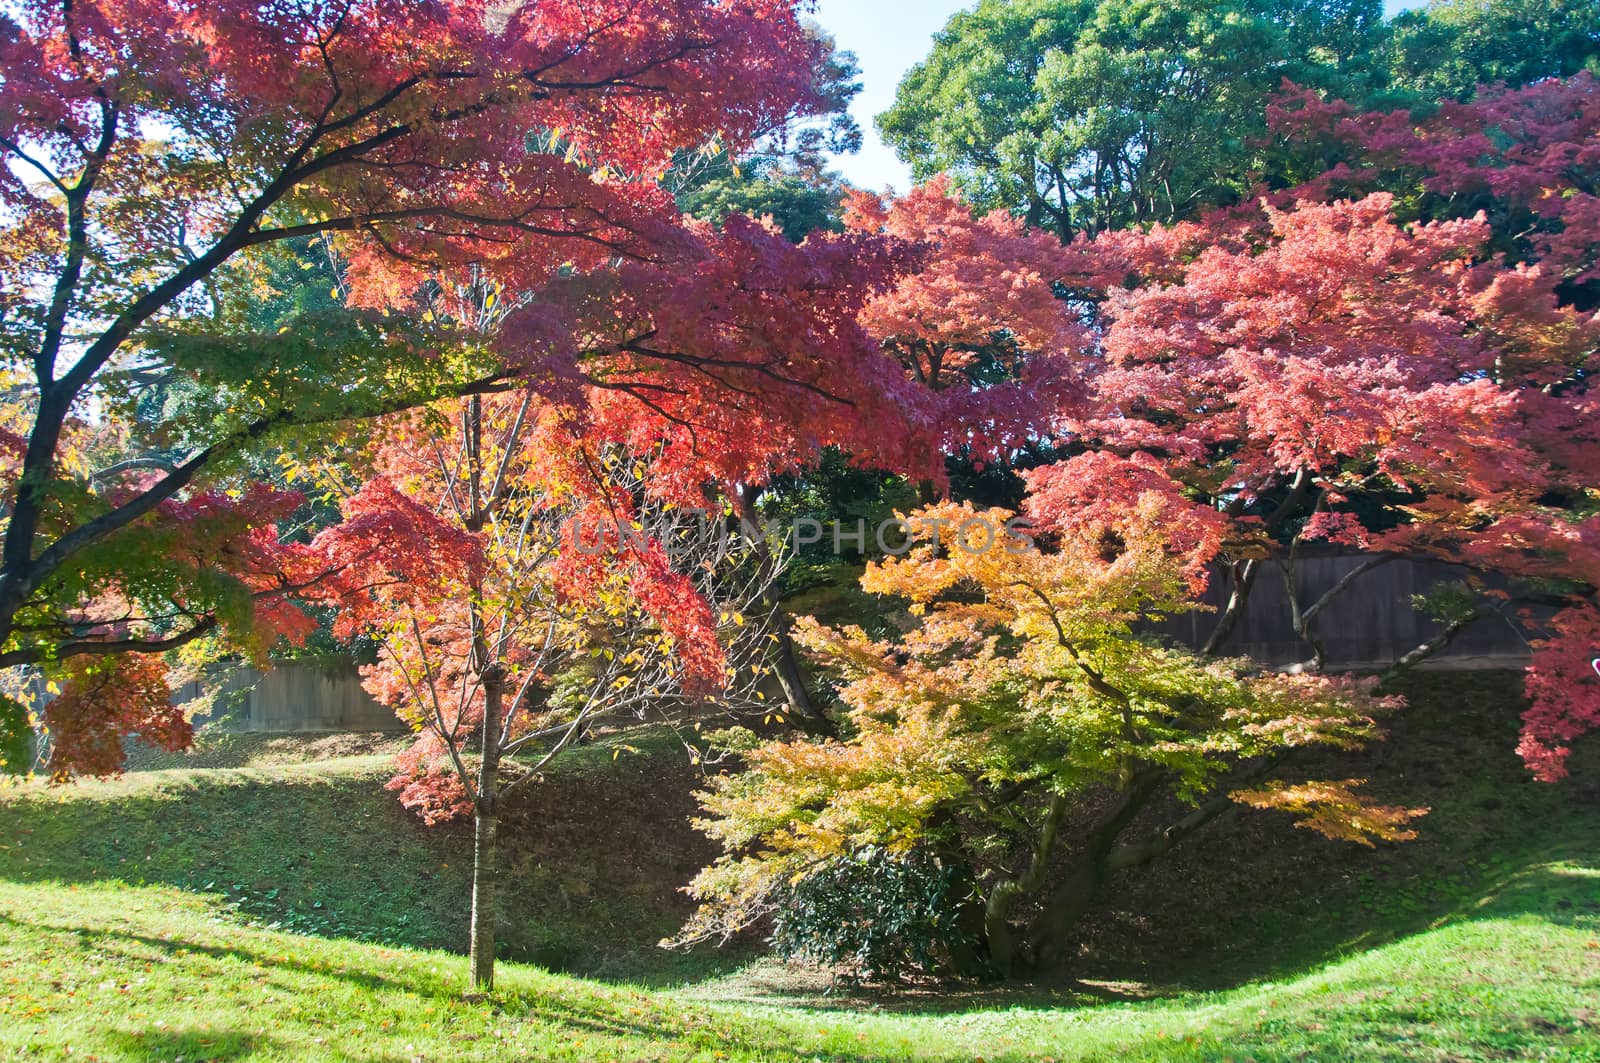 Foliage Autumn leaves in red orange yellow and green colour maple leaves in a sunny day in Tokyo Japan